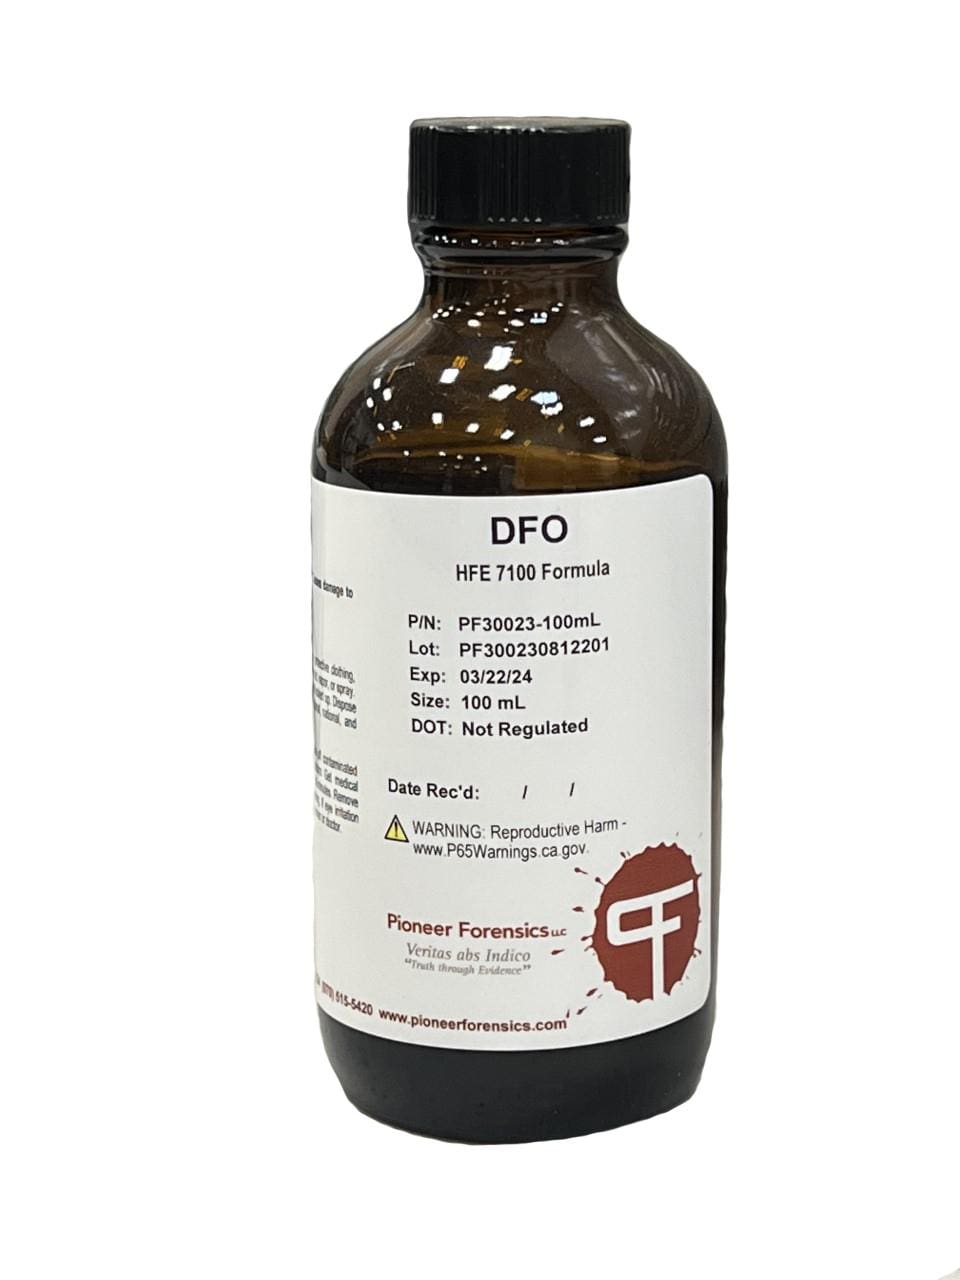 DFO is a Ninhydrin analogue which reacts to the amino acids present in protein.